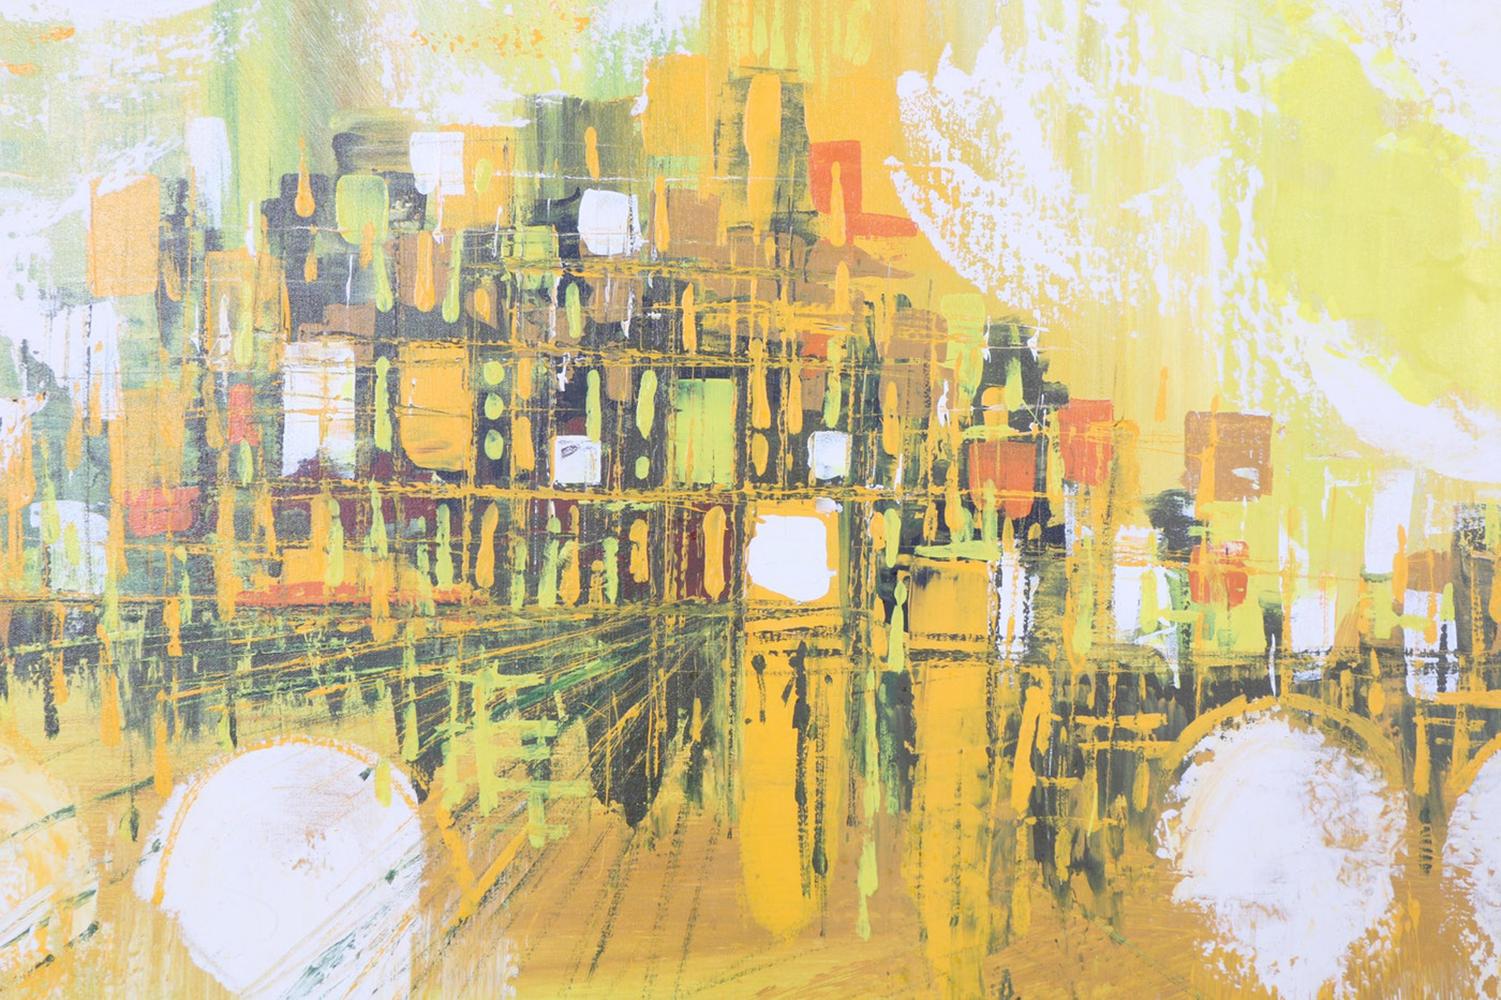 An oil painting of an abstract cityscape by Lee Reynolds. This painting on canvas depicts a textured city against a canary yellow background accented with wisps of white painting. An artist signature is seen in black towards the bottom right corner.